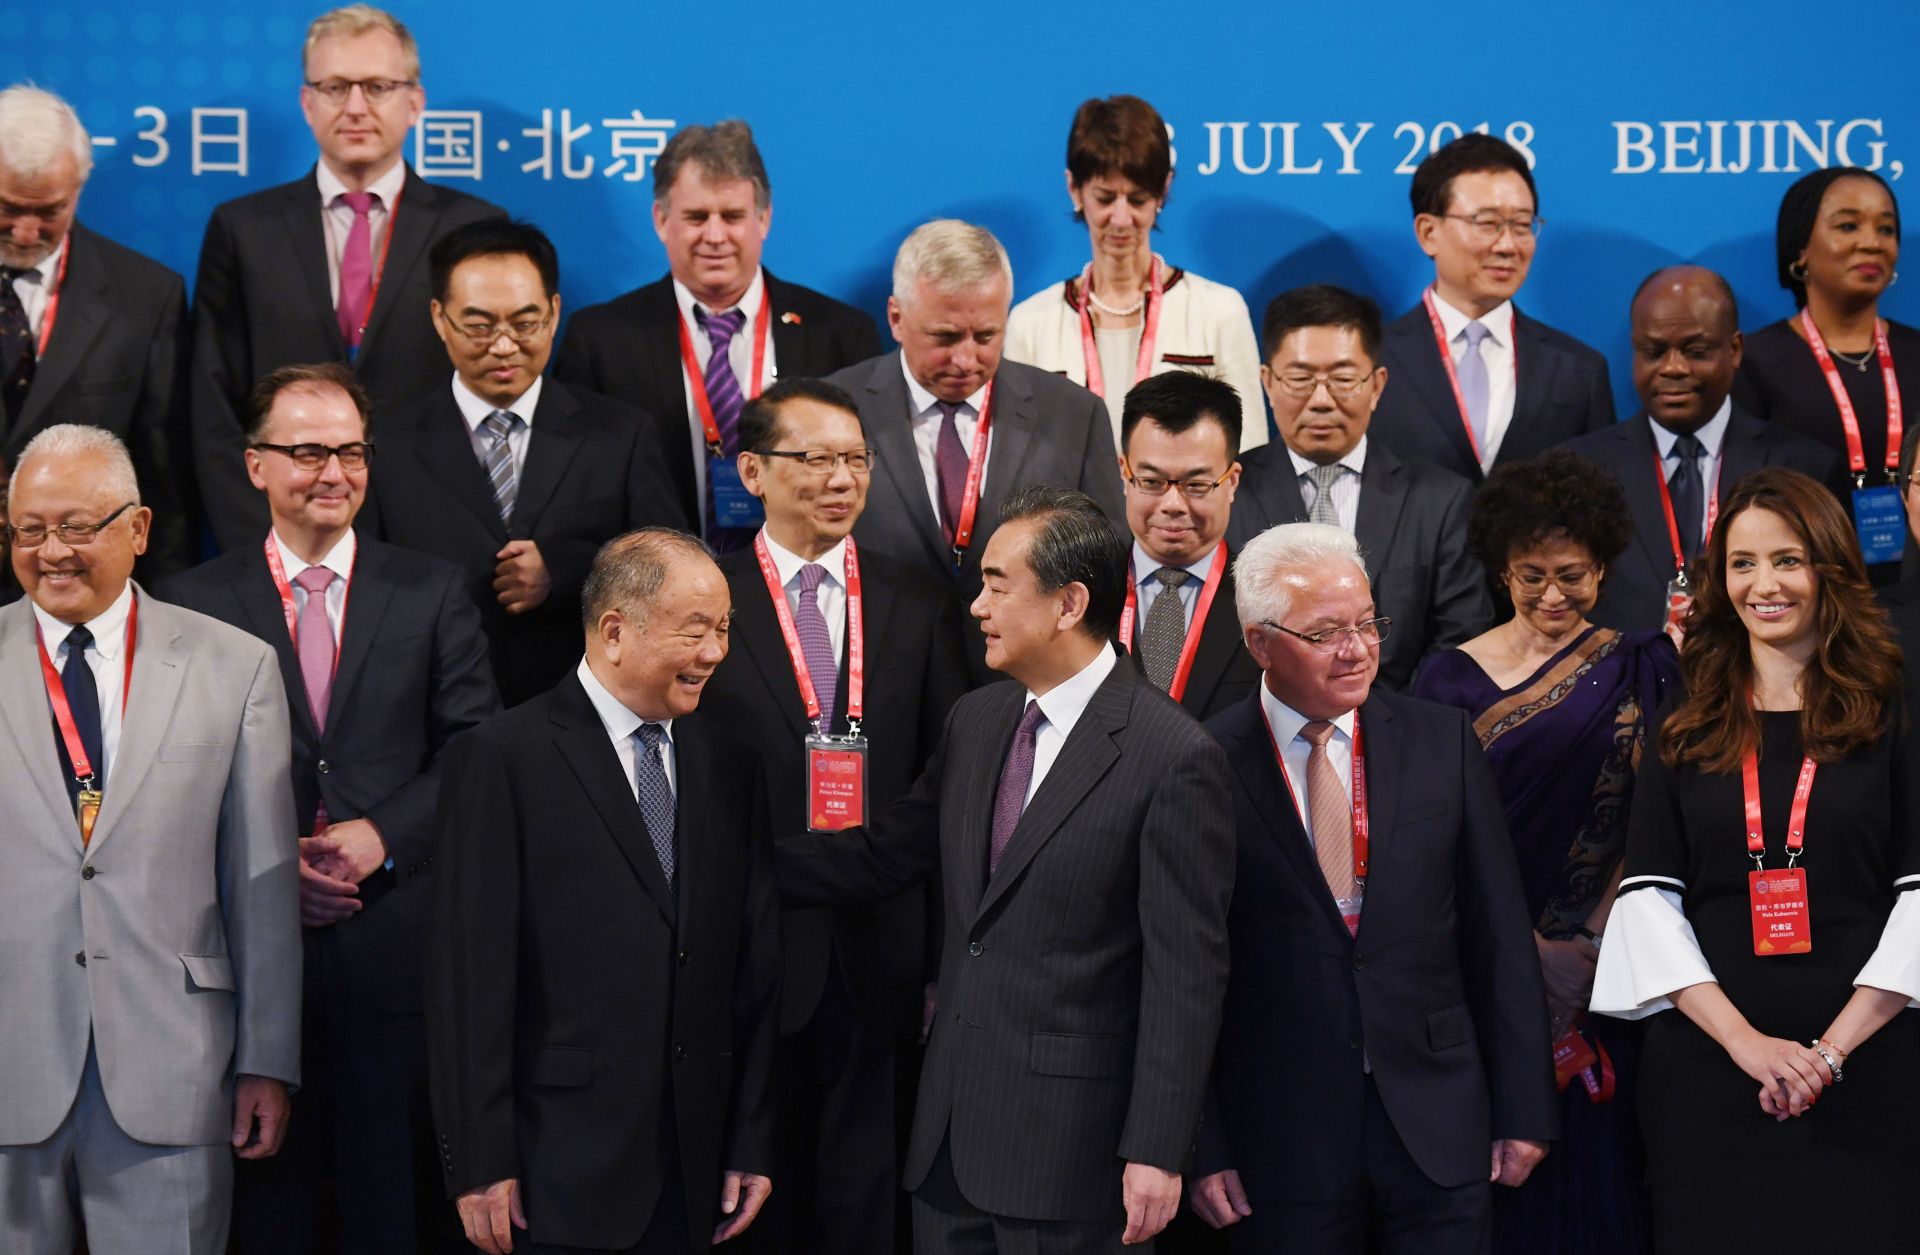 Chinese Foreign Minister Wang Yi, front center, stands with other delegates for a group photo before the Belt and Road Forum on Legal Cooperation began in Beijing on July 2, 2018.